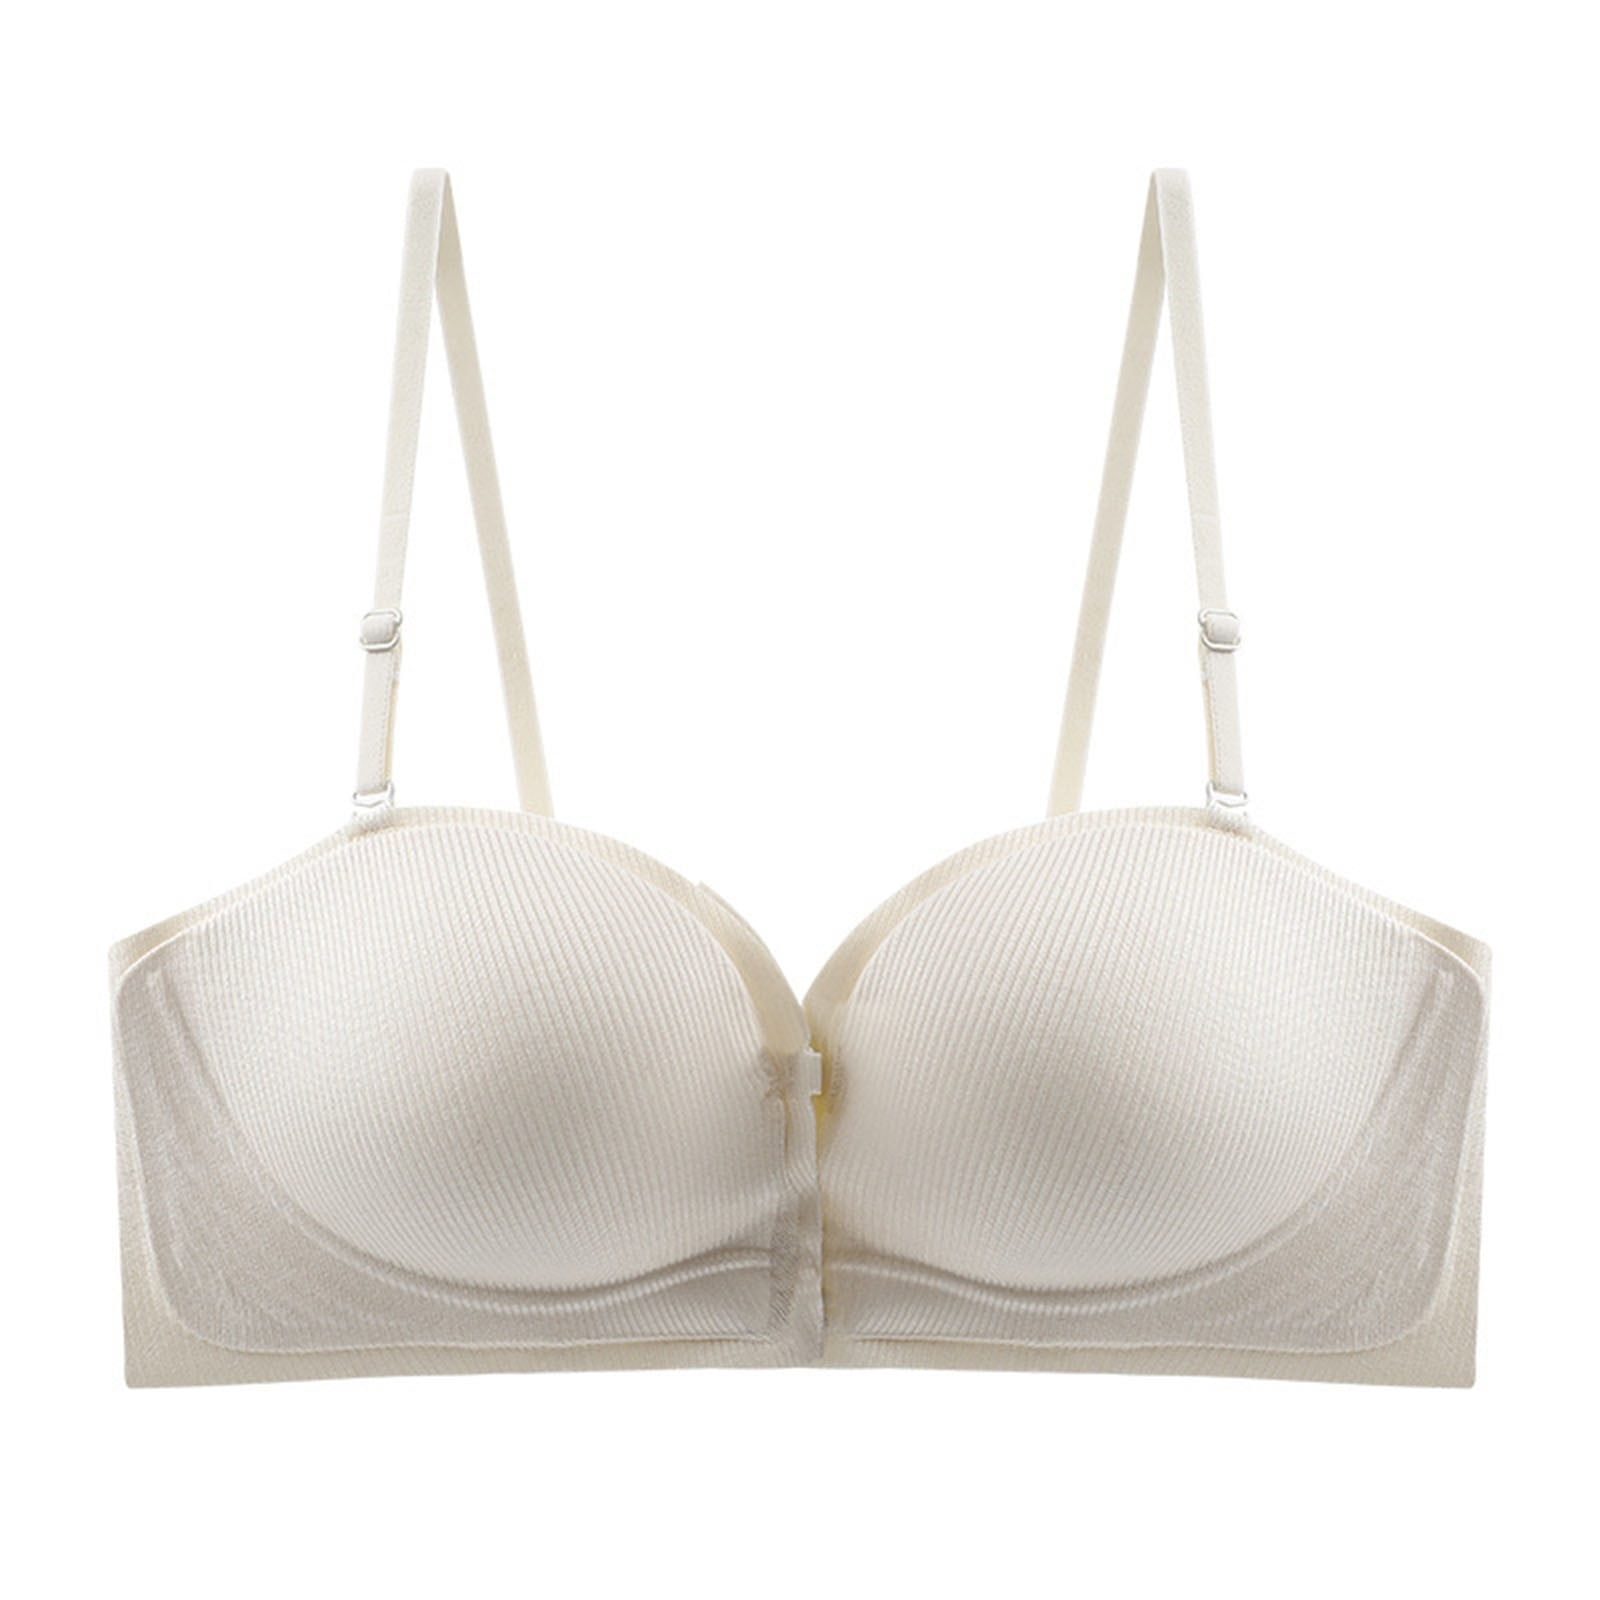 SELONE Bras for Women Push Up No Underwire Strapless for Small